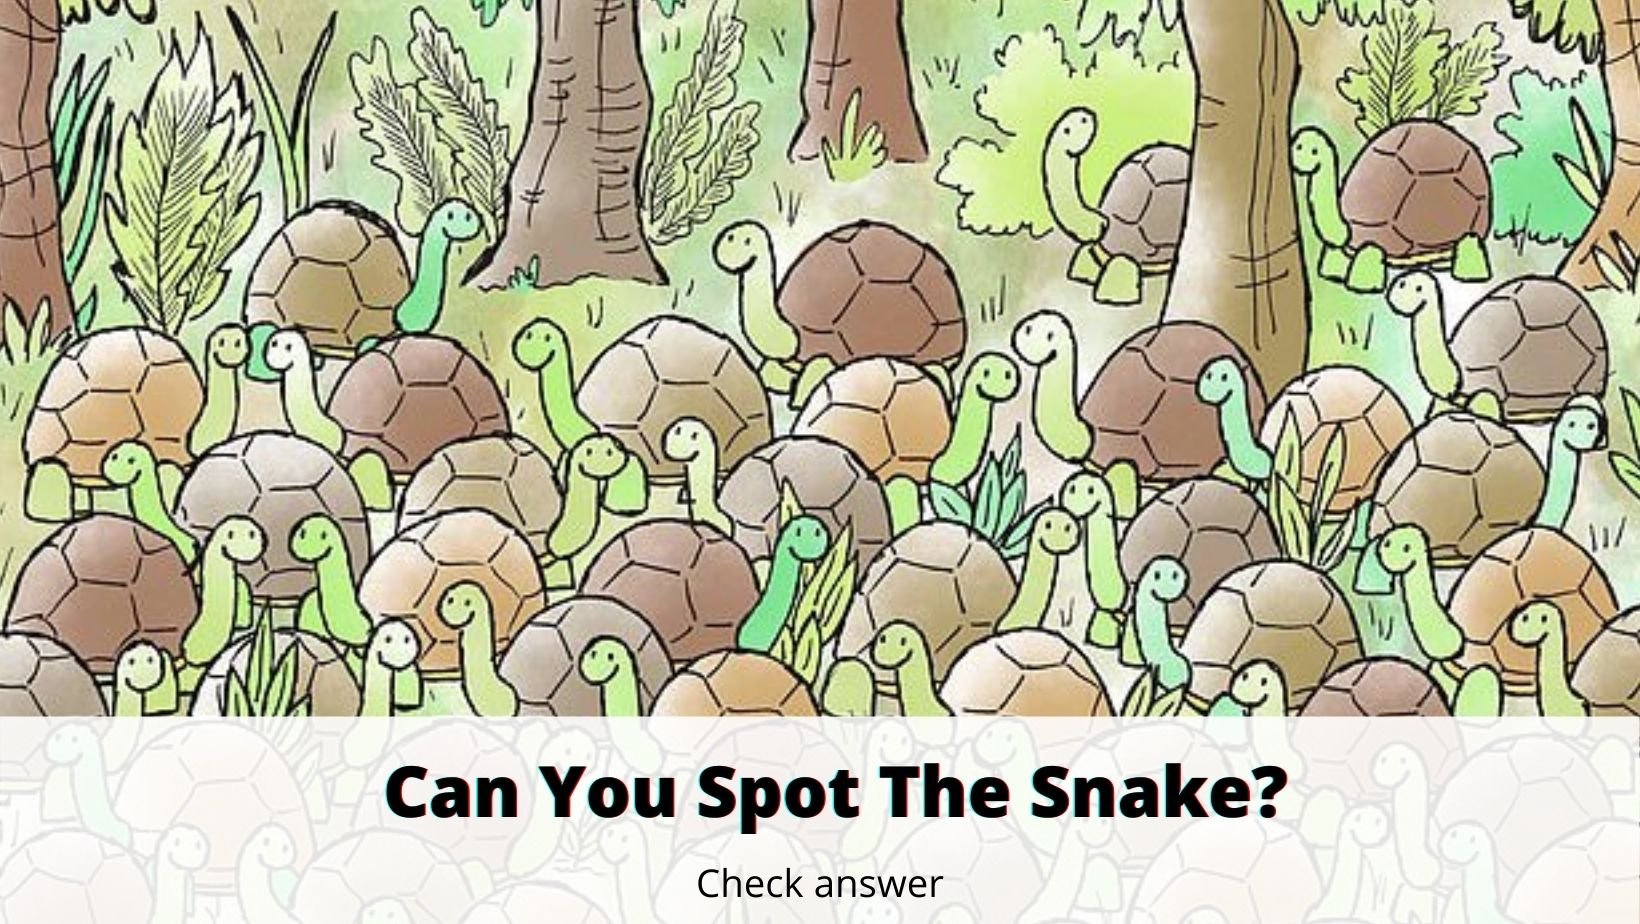 small joys thumbnail 6 2.jpg?resize=412,232 - Can You Find The Snake Among The Turtles?